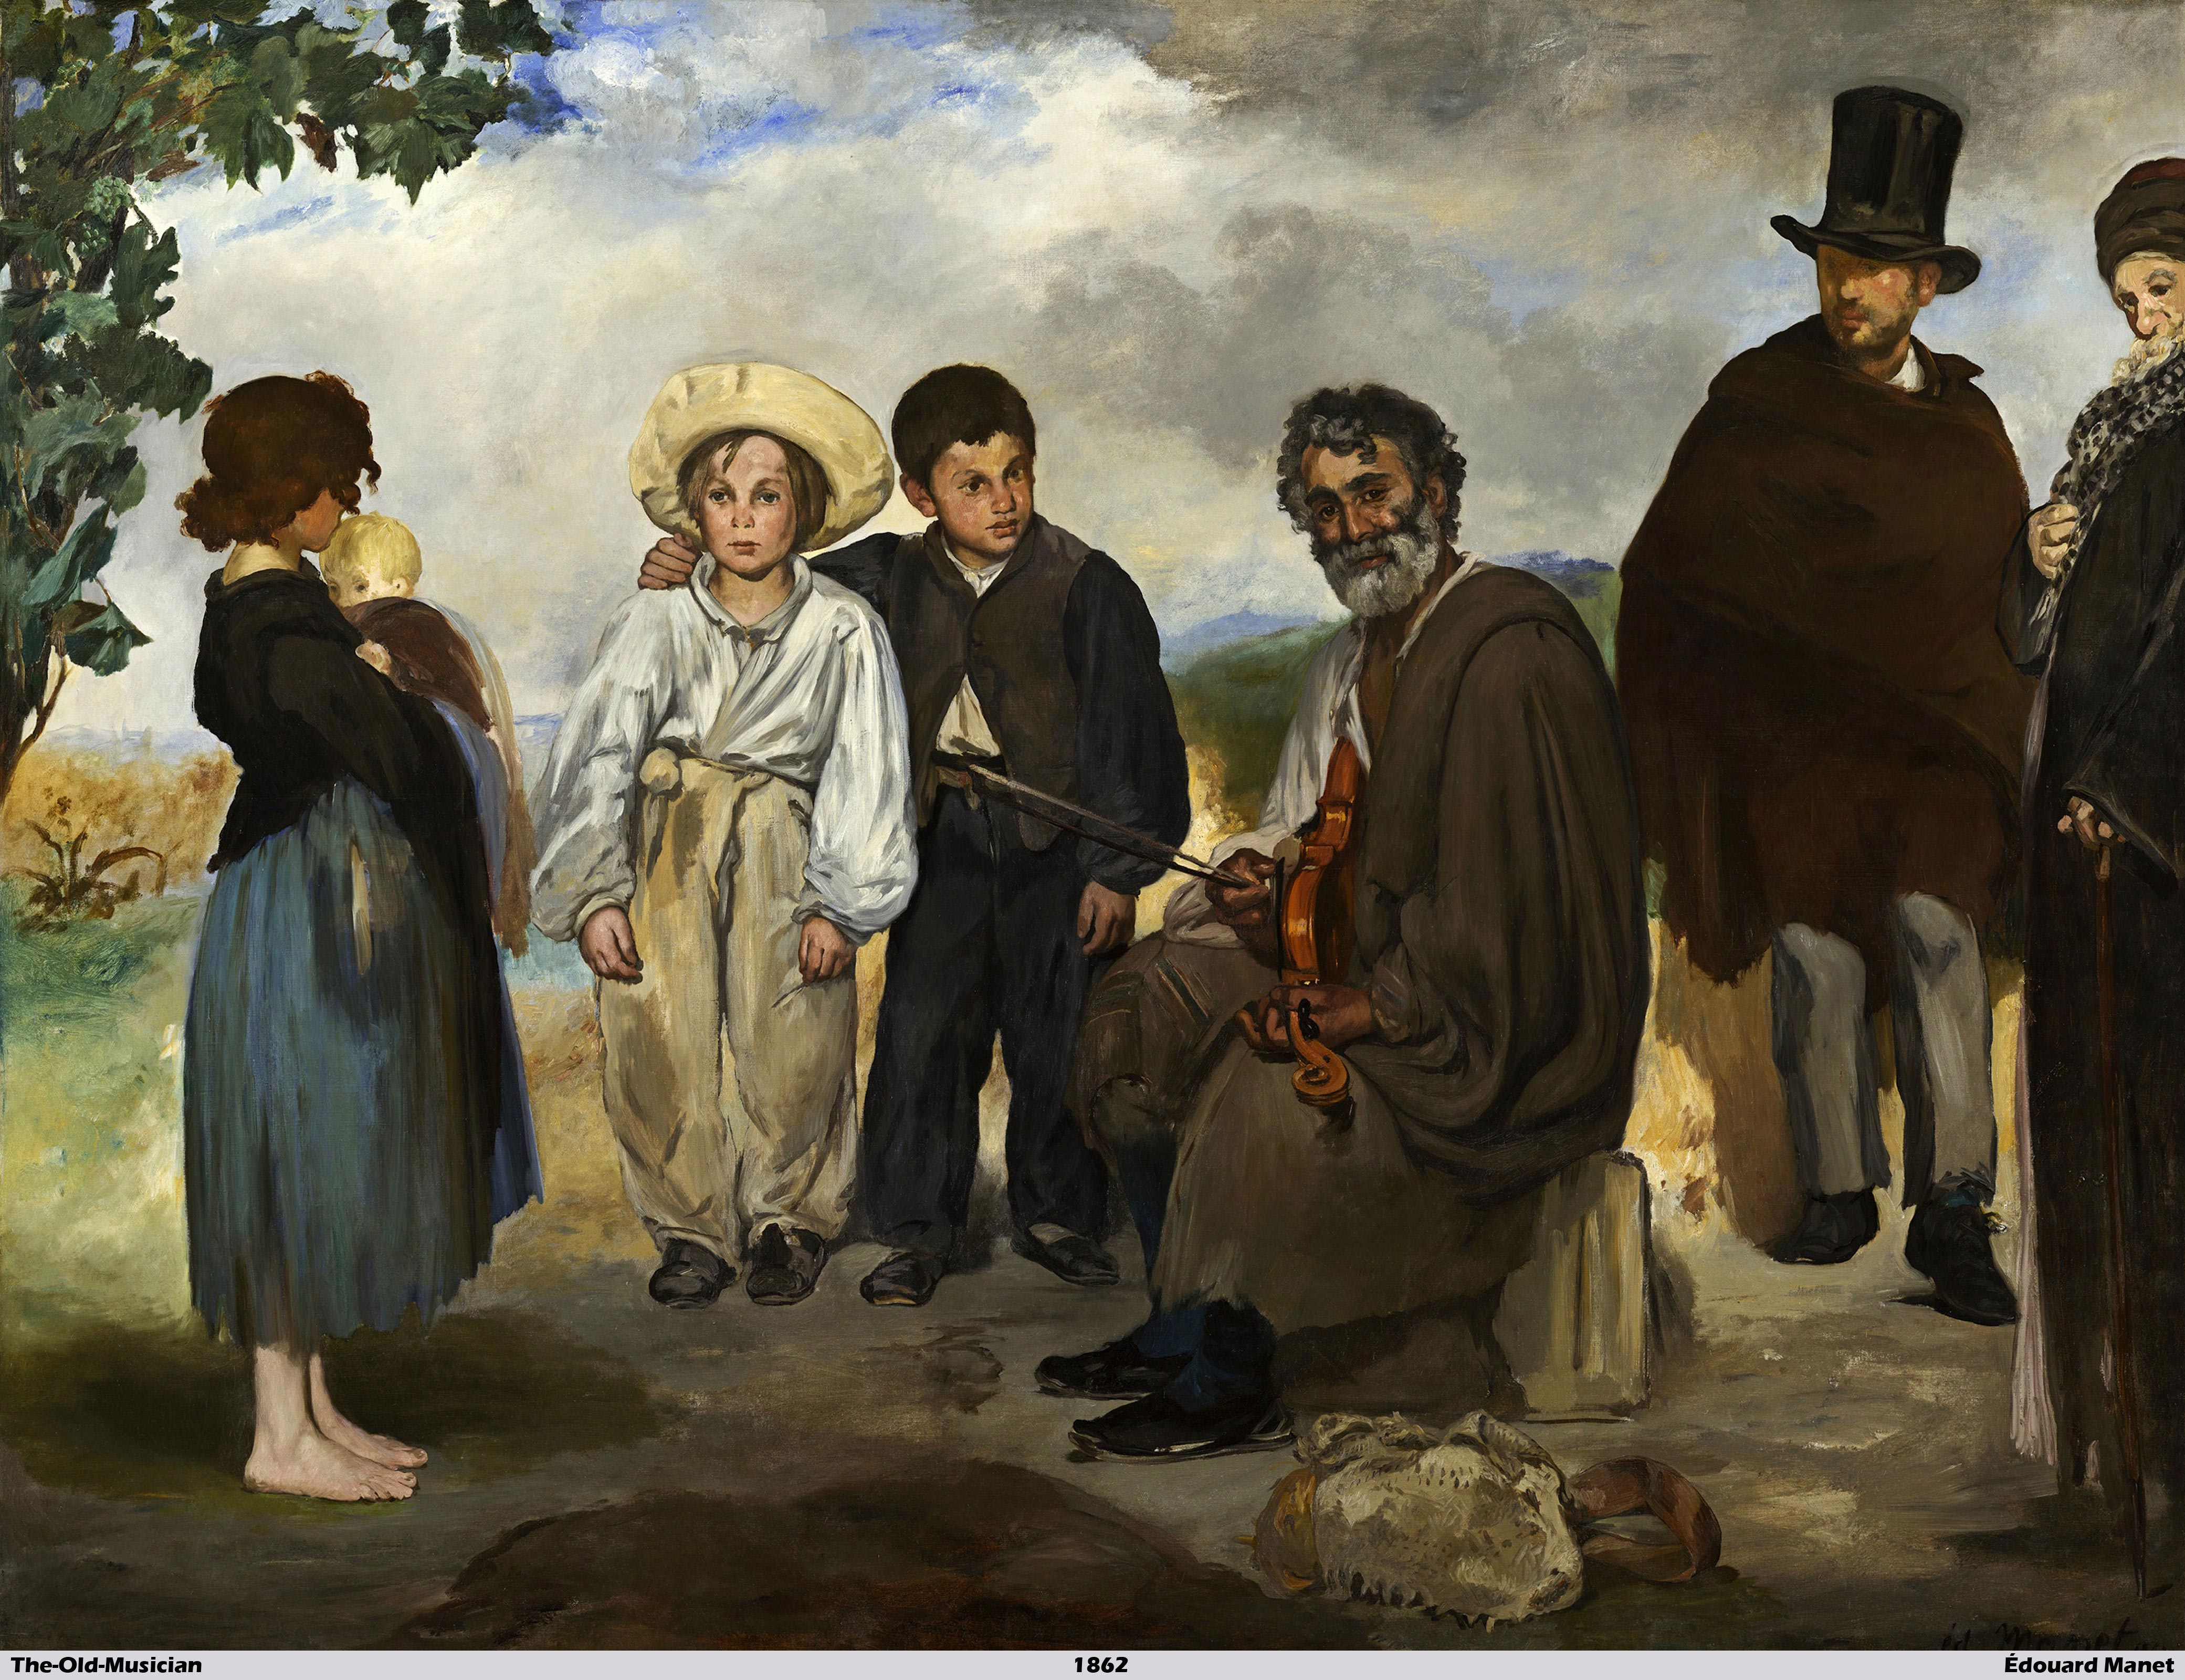 The Old Musician by Édouard Manet